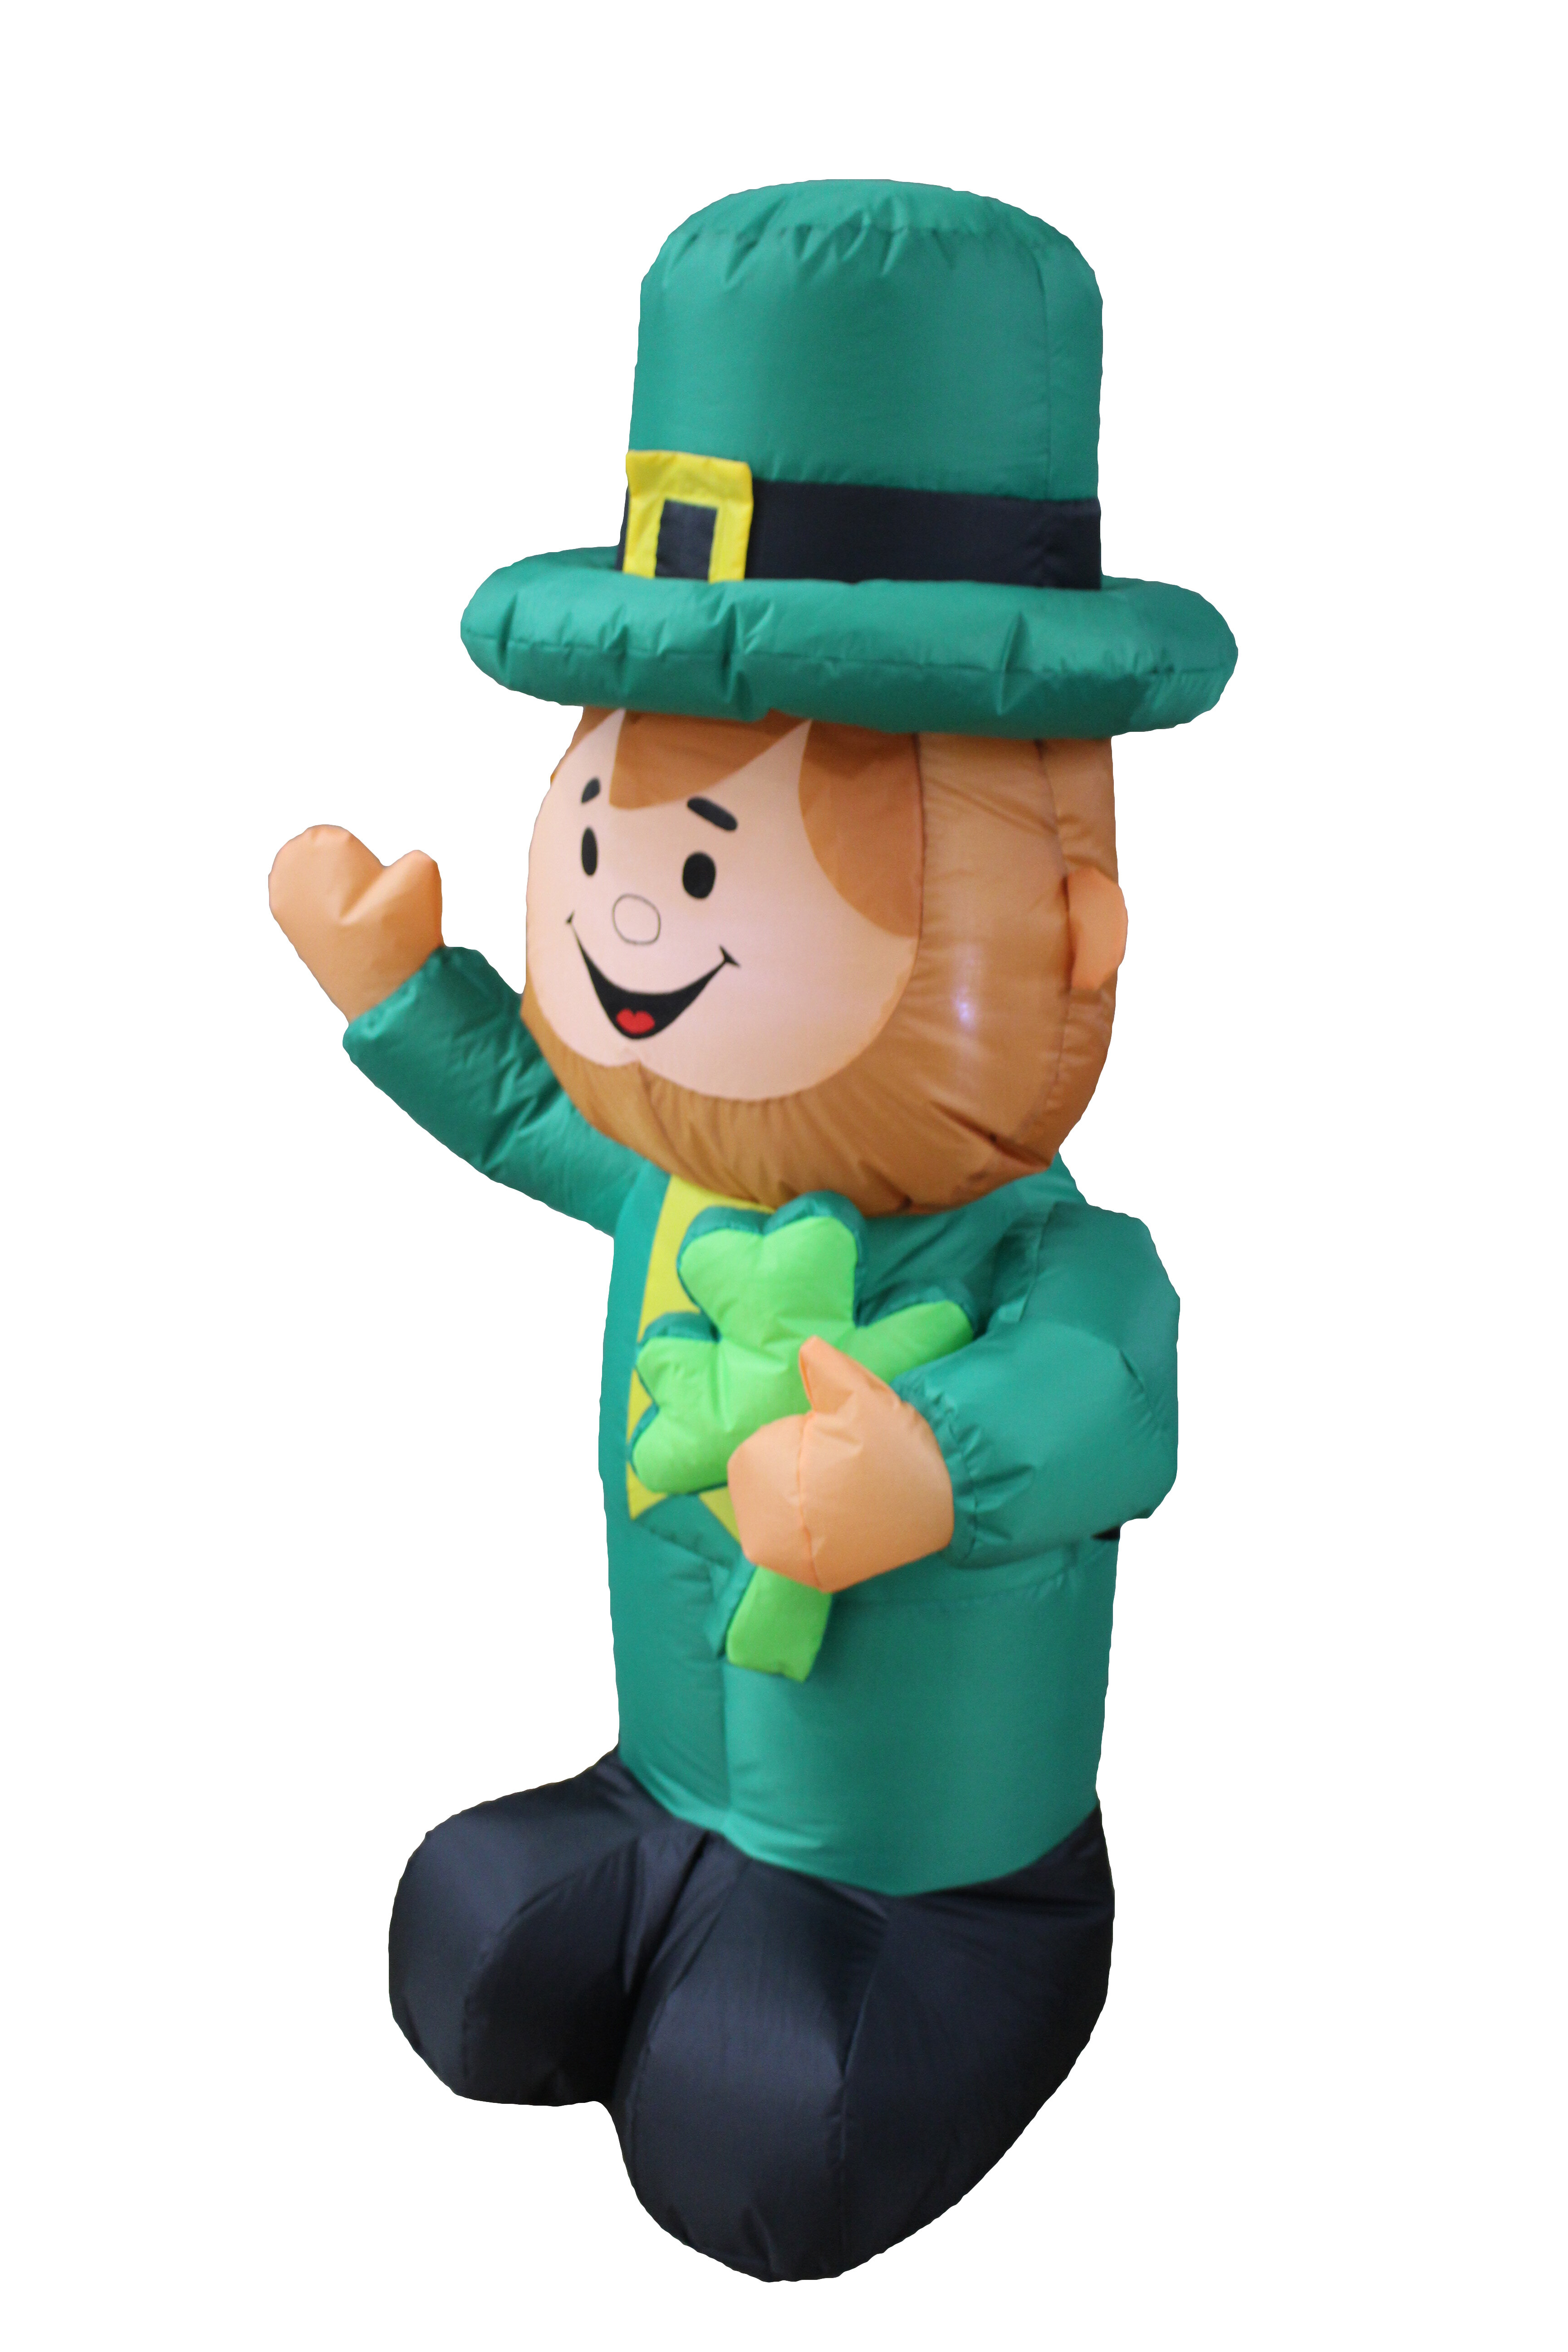 Patrickâ€™s Day Inflatables Ohstgp 5.9 Ft St Outdoor Inflatables Leprechaun with LED Light Holding Four-Leaf Clover Irish Leprechaun Inflatable Lighted Decoration